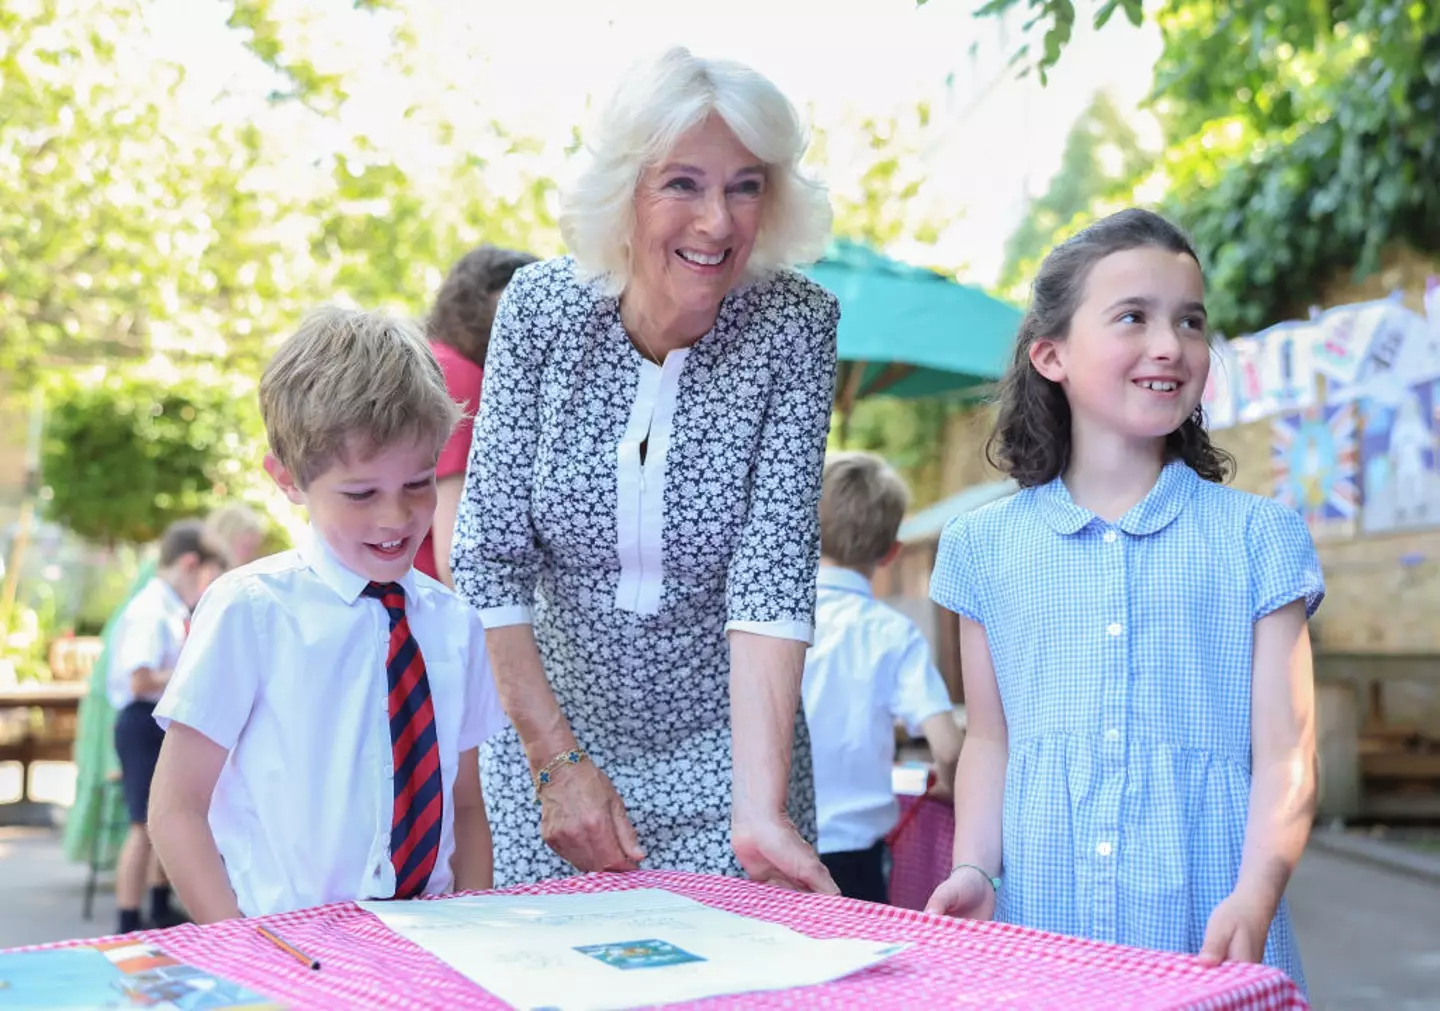 Queen Camilla visited the primary school as part of a royal engagement yesterday (Chris Jackson/Getty Images)